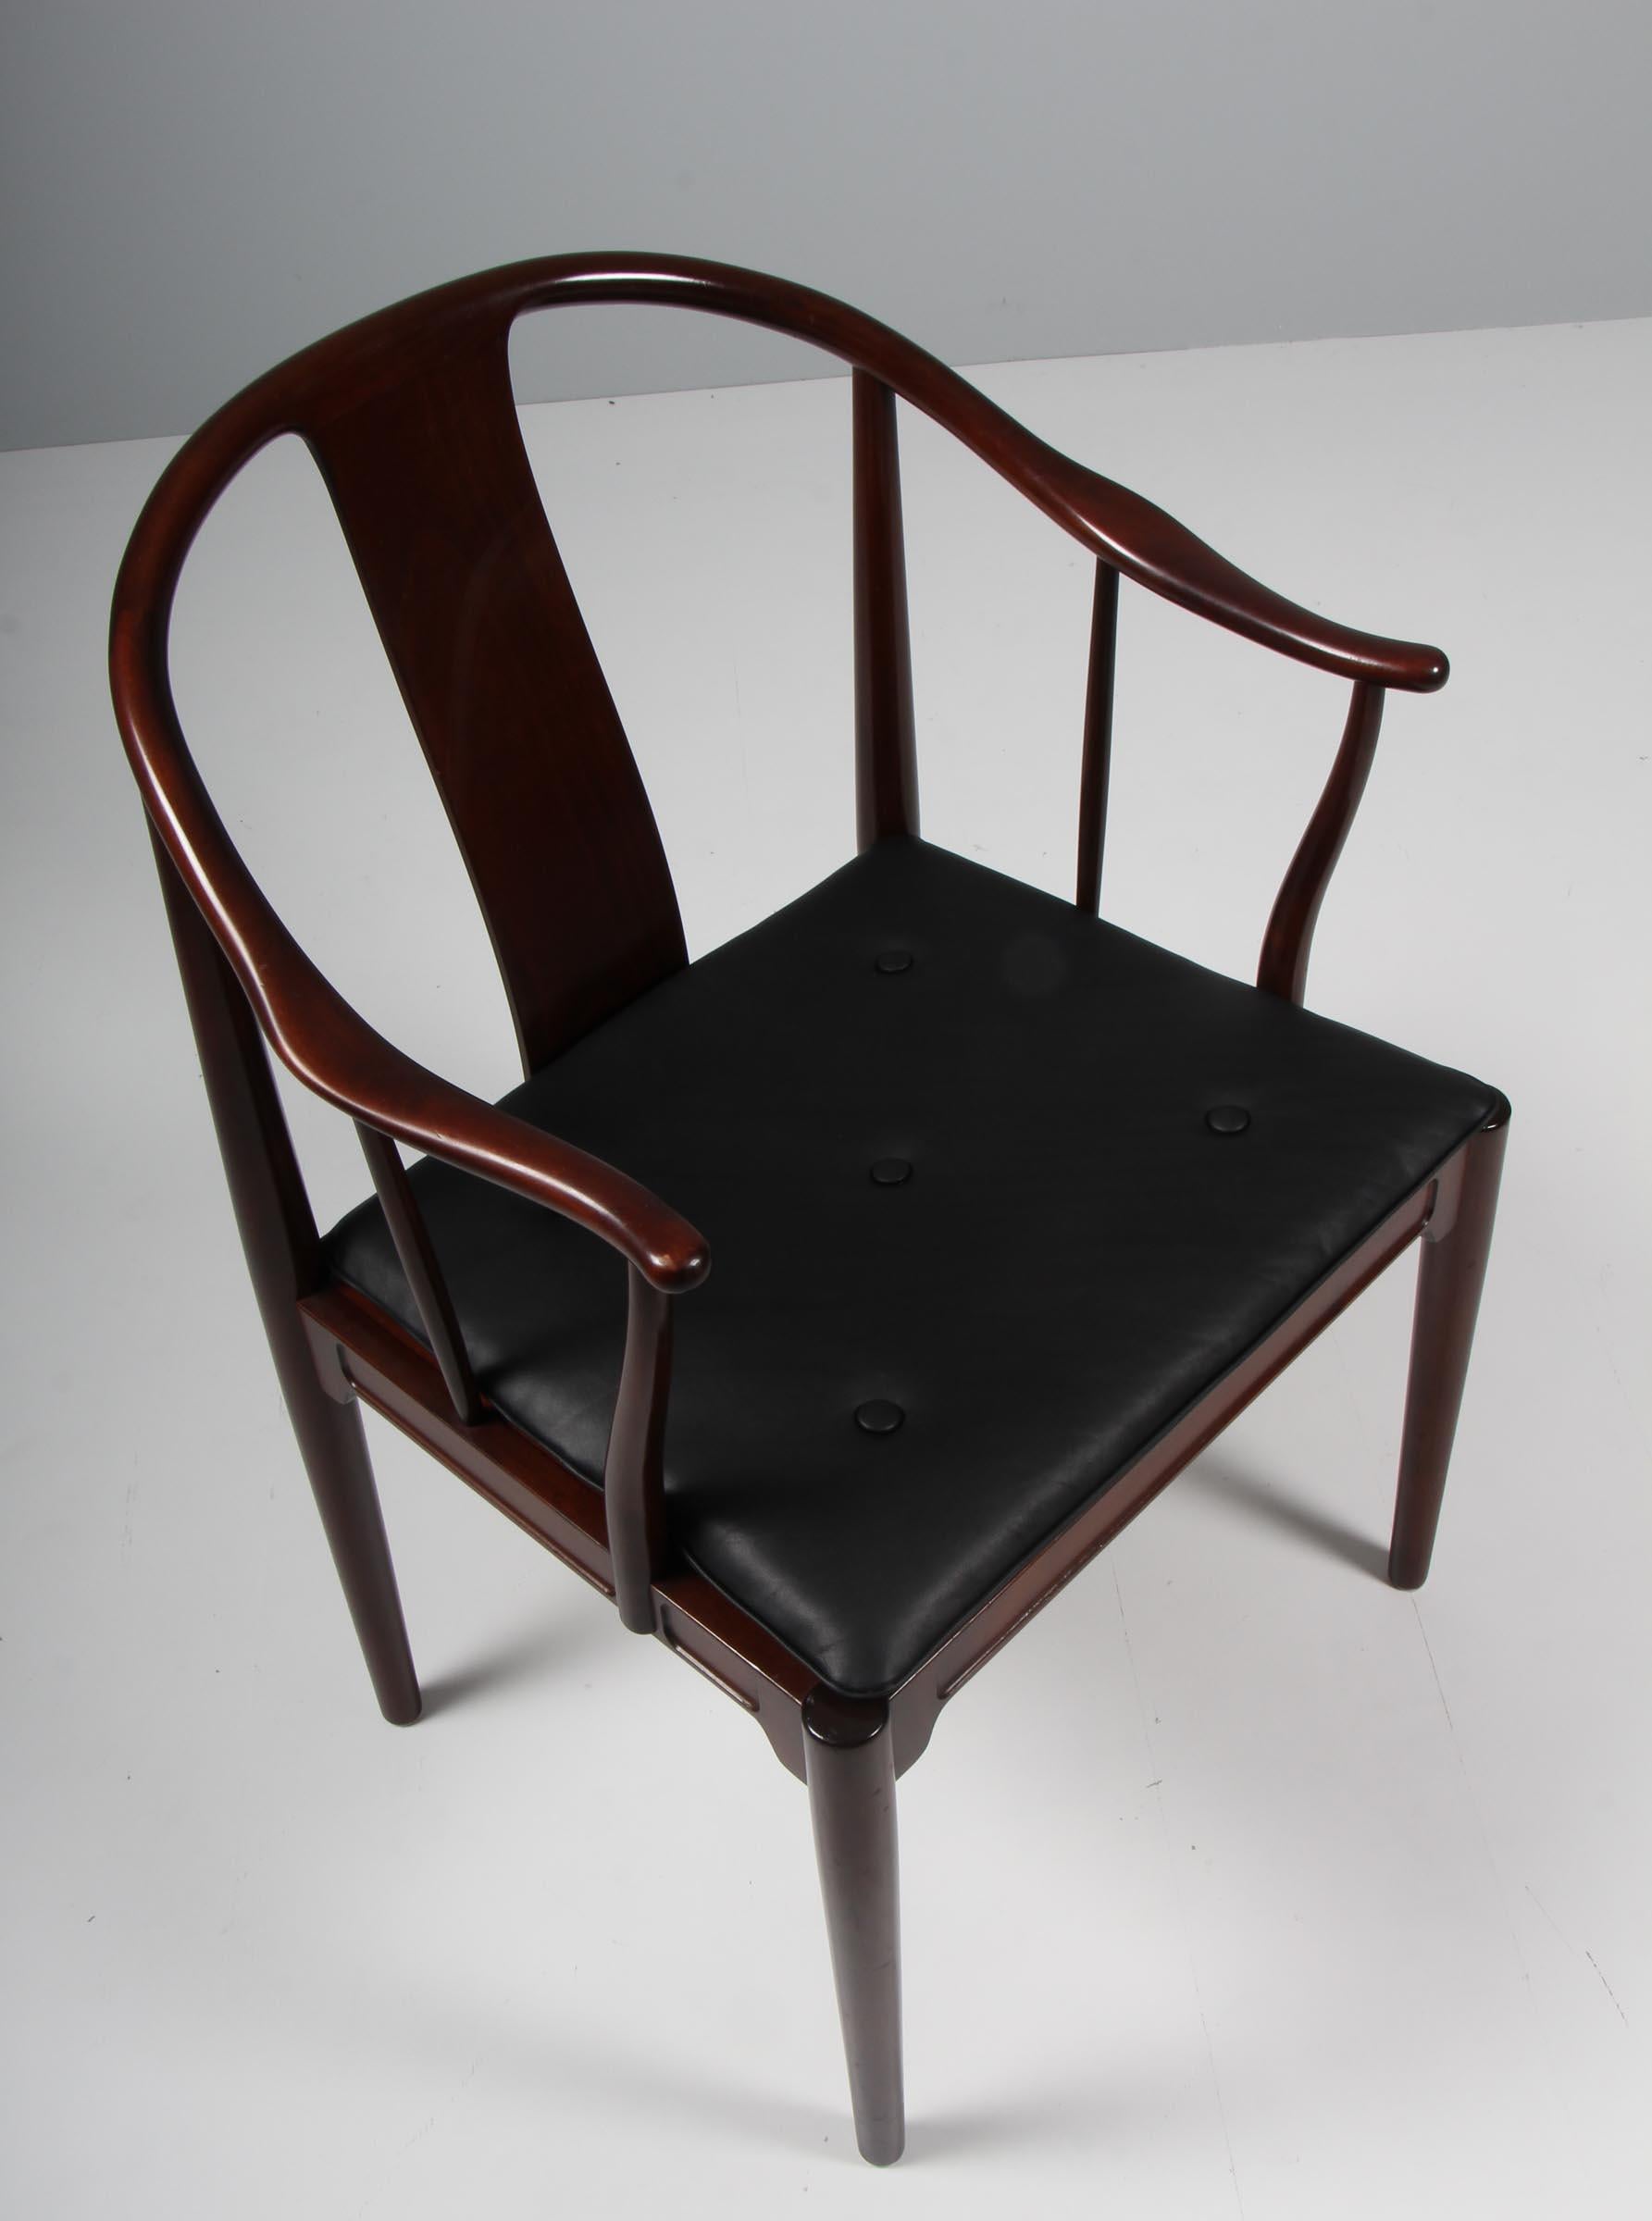 Hans J. Wegner famous and beautiful chair is an adaptation of an old Chinese chair of the Ming dynasty; “China Chair”. A very comfortable armchair made in mahogany. Loose seat cushions new upholstered with black aniline leather, fitted with buttons.